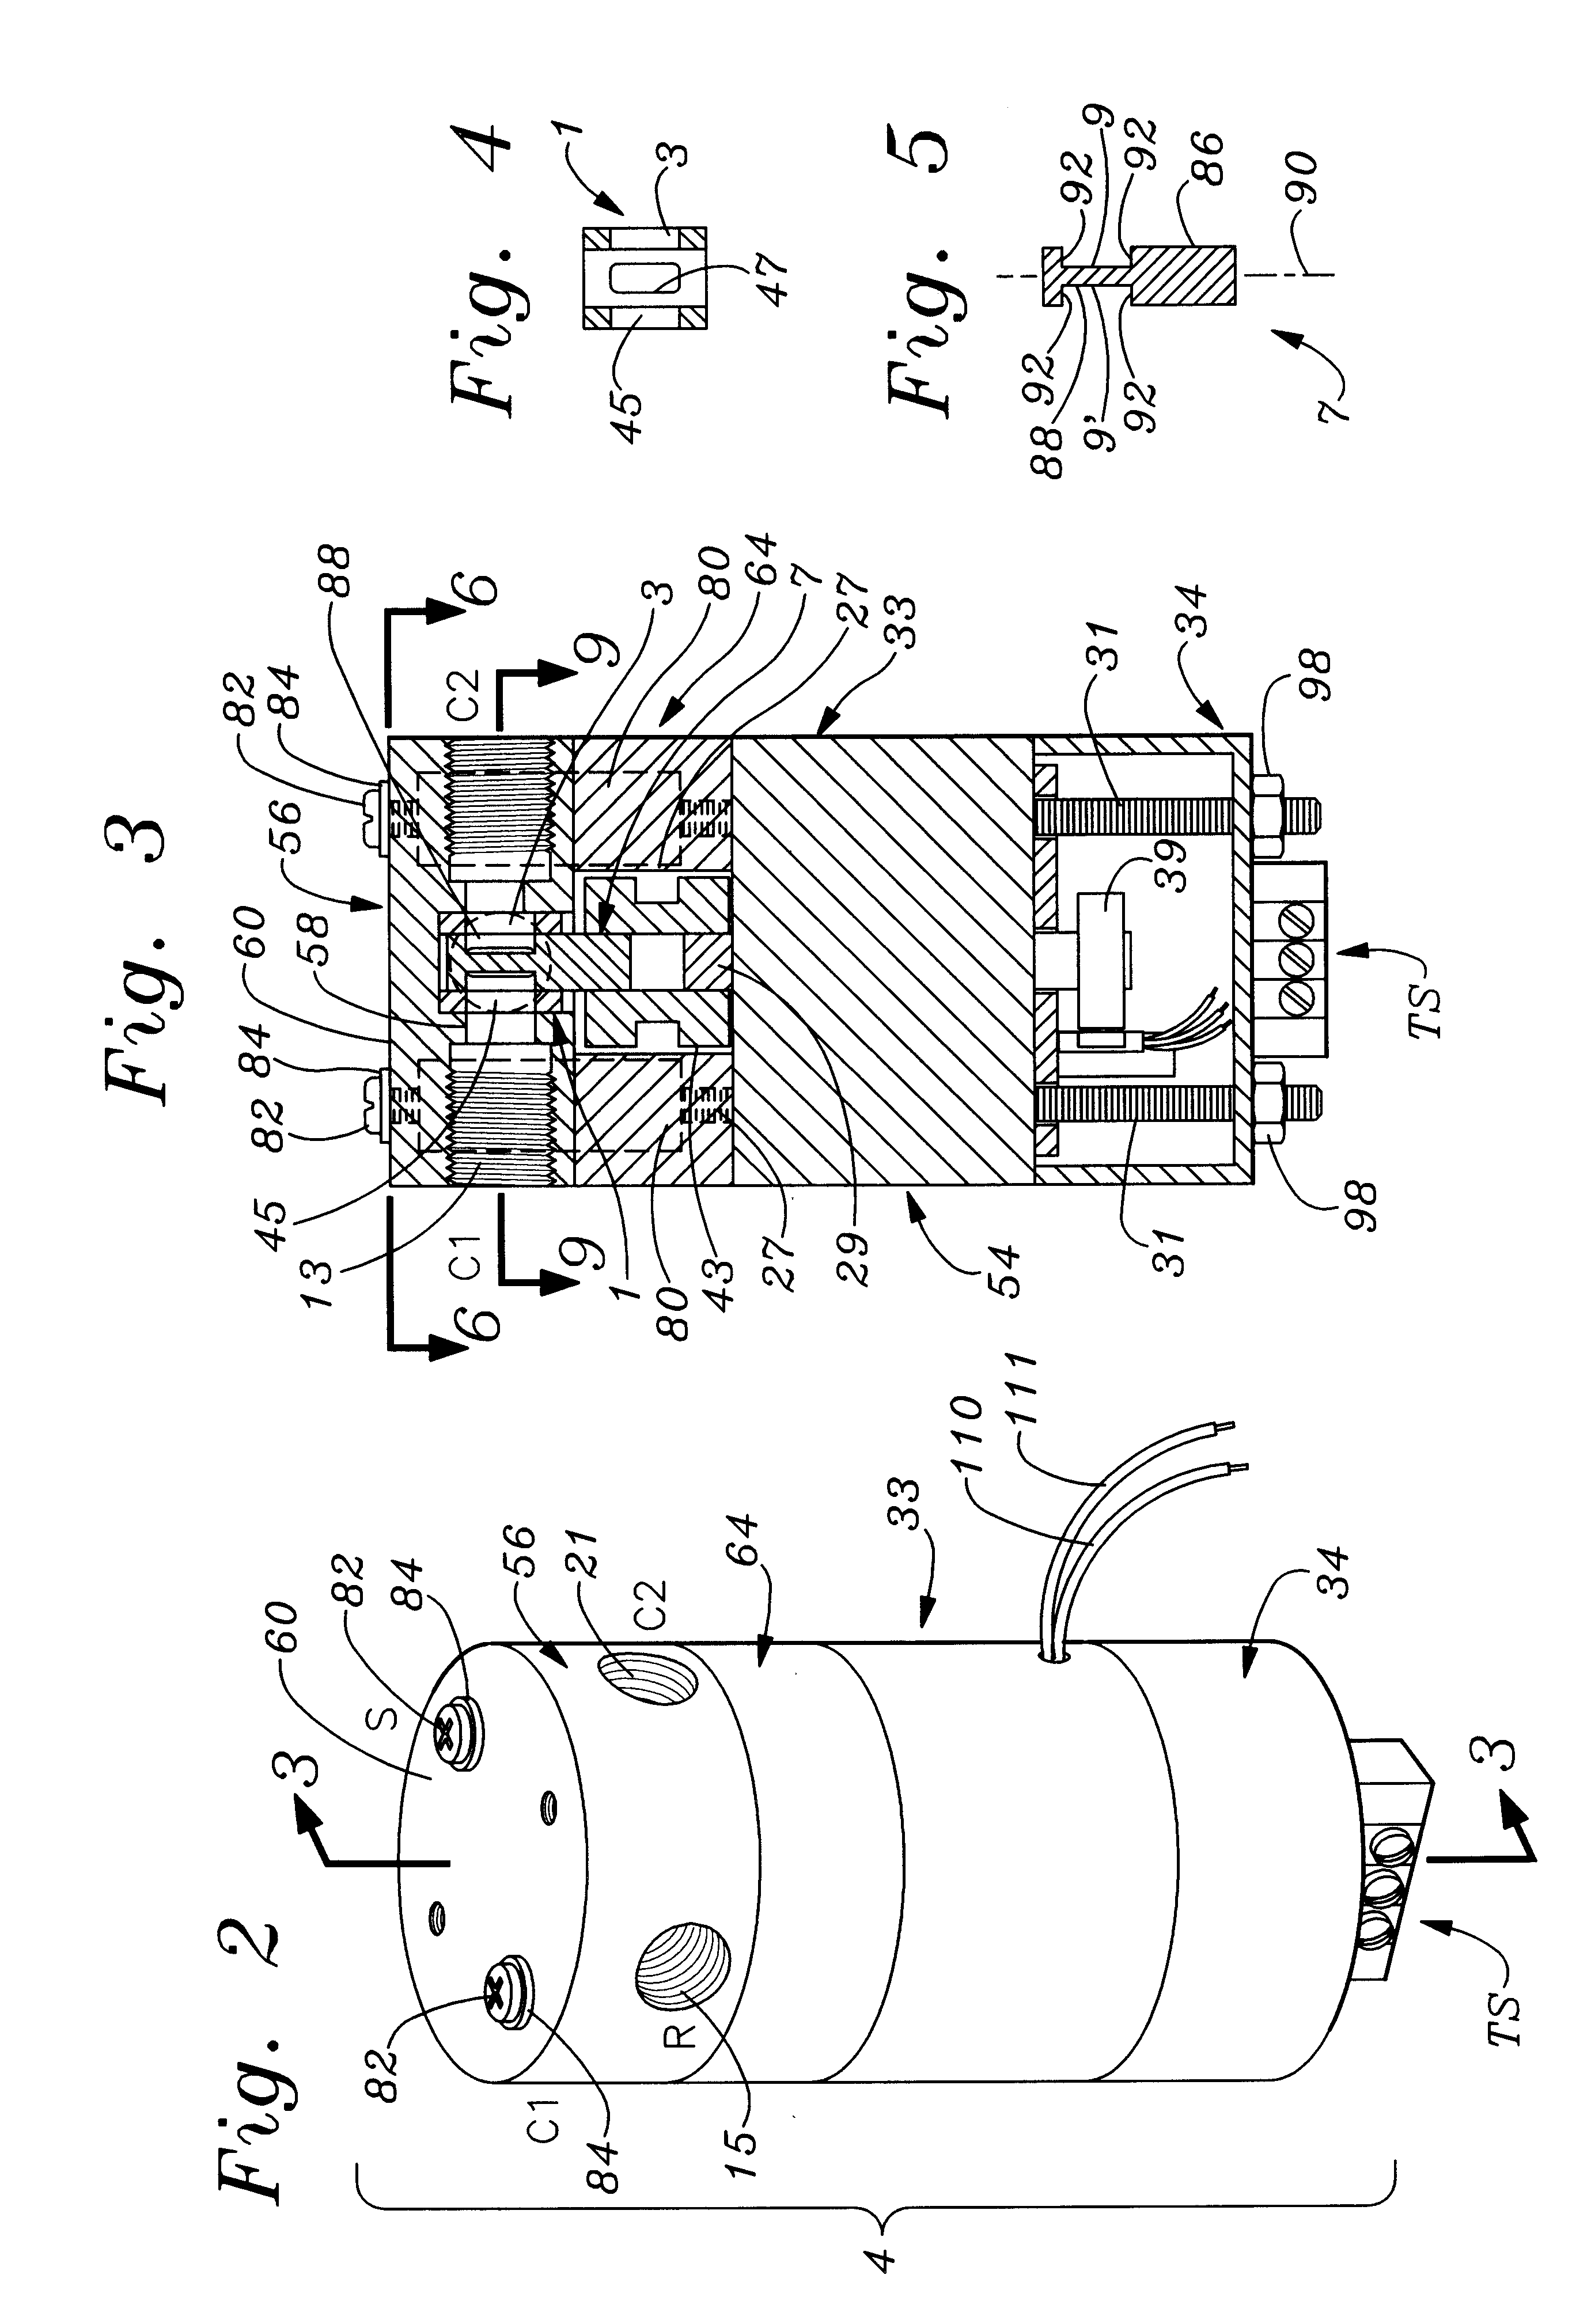 Rotary servovalve and control system